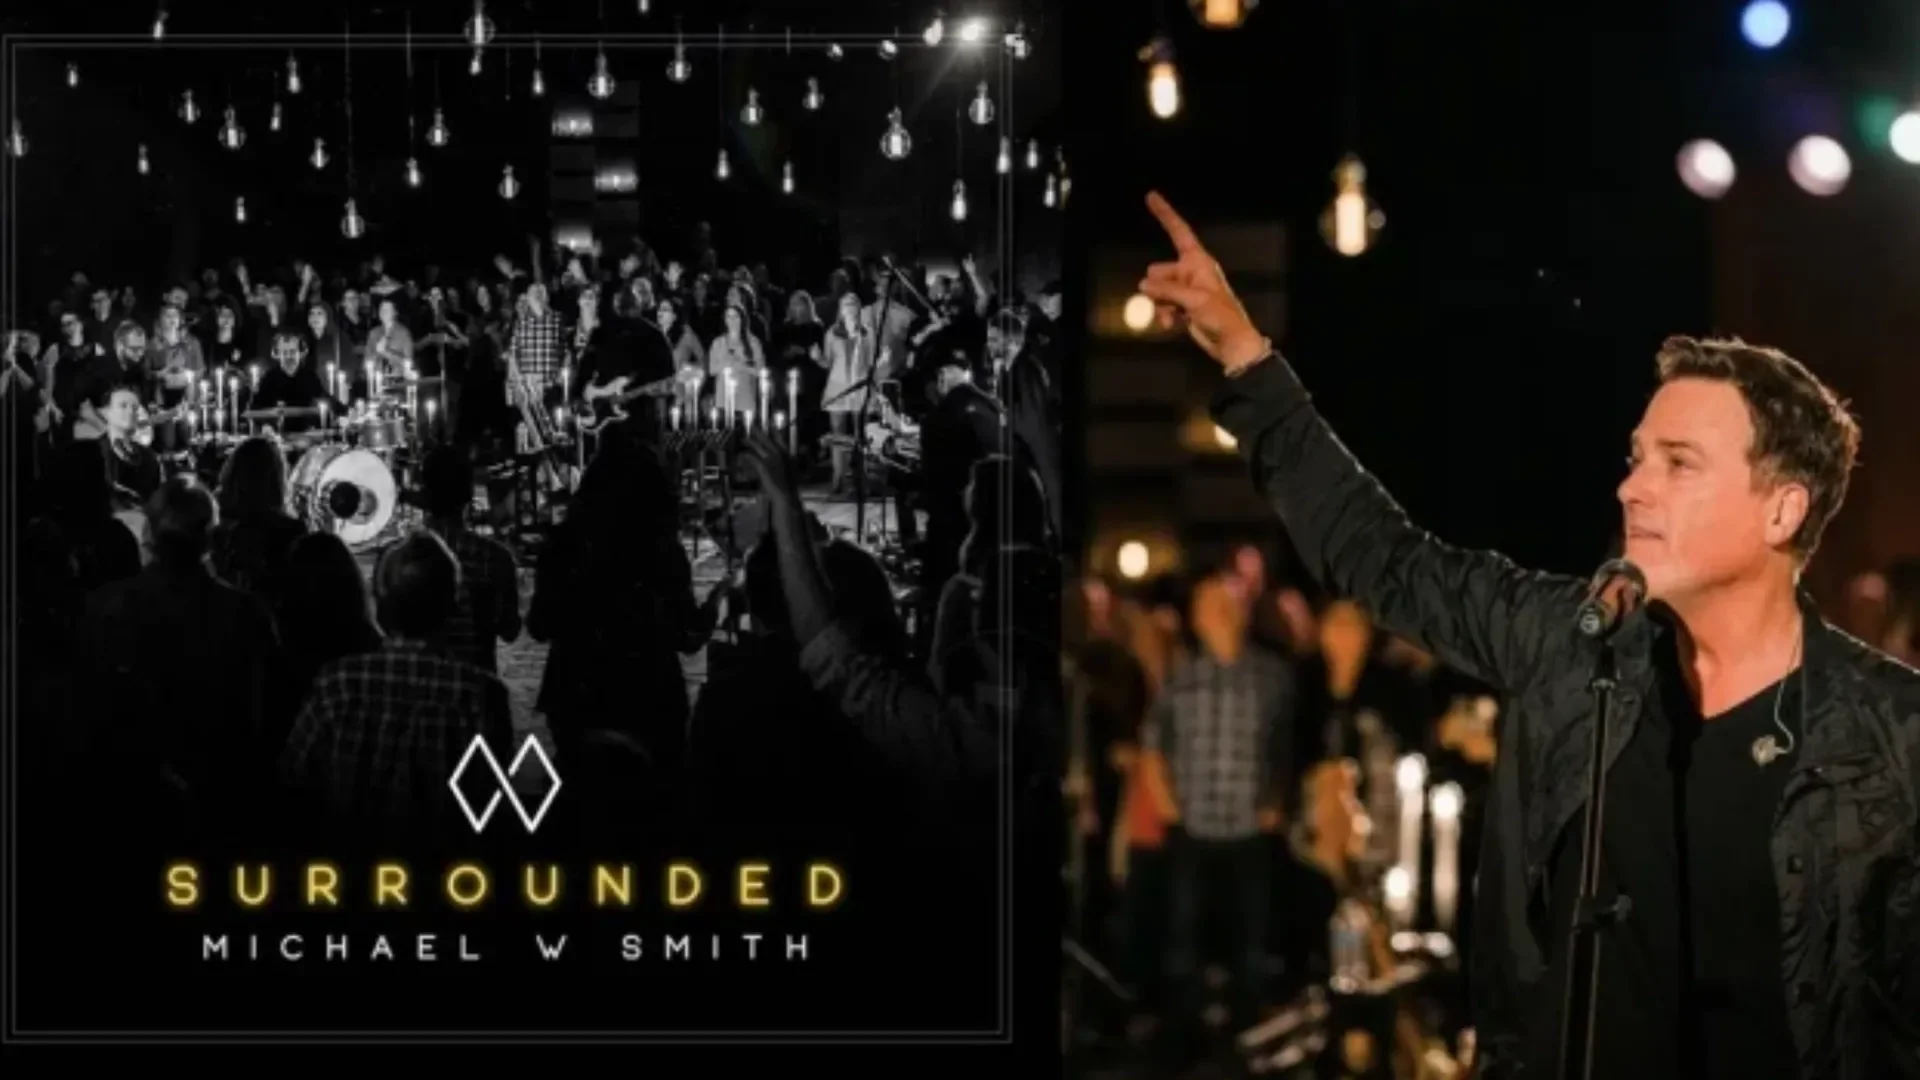 Surrounded: Michael W. Smith